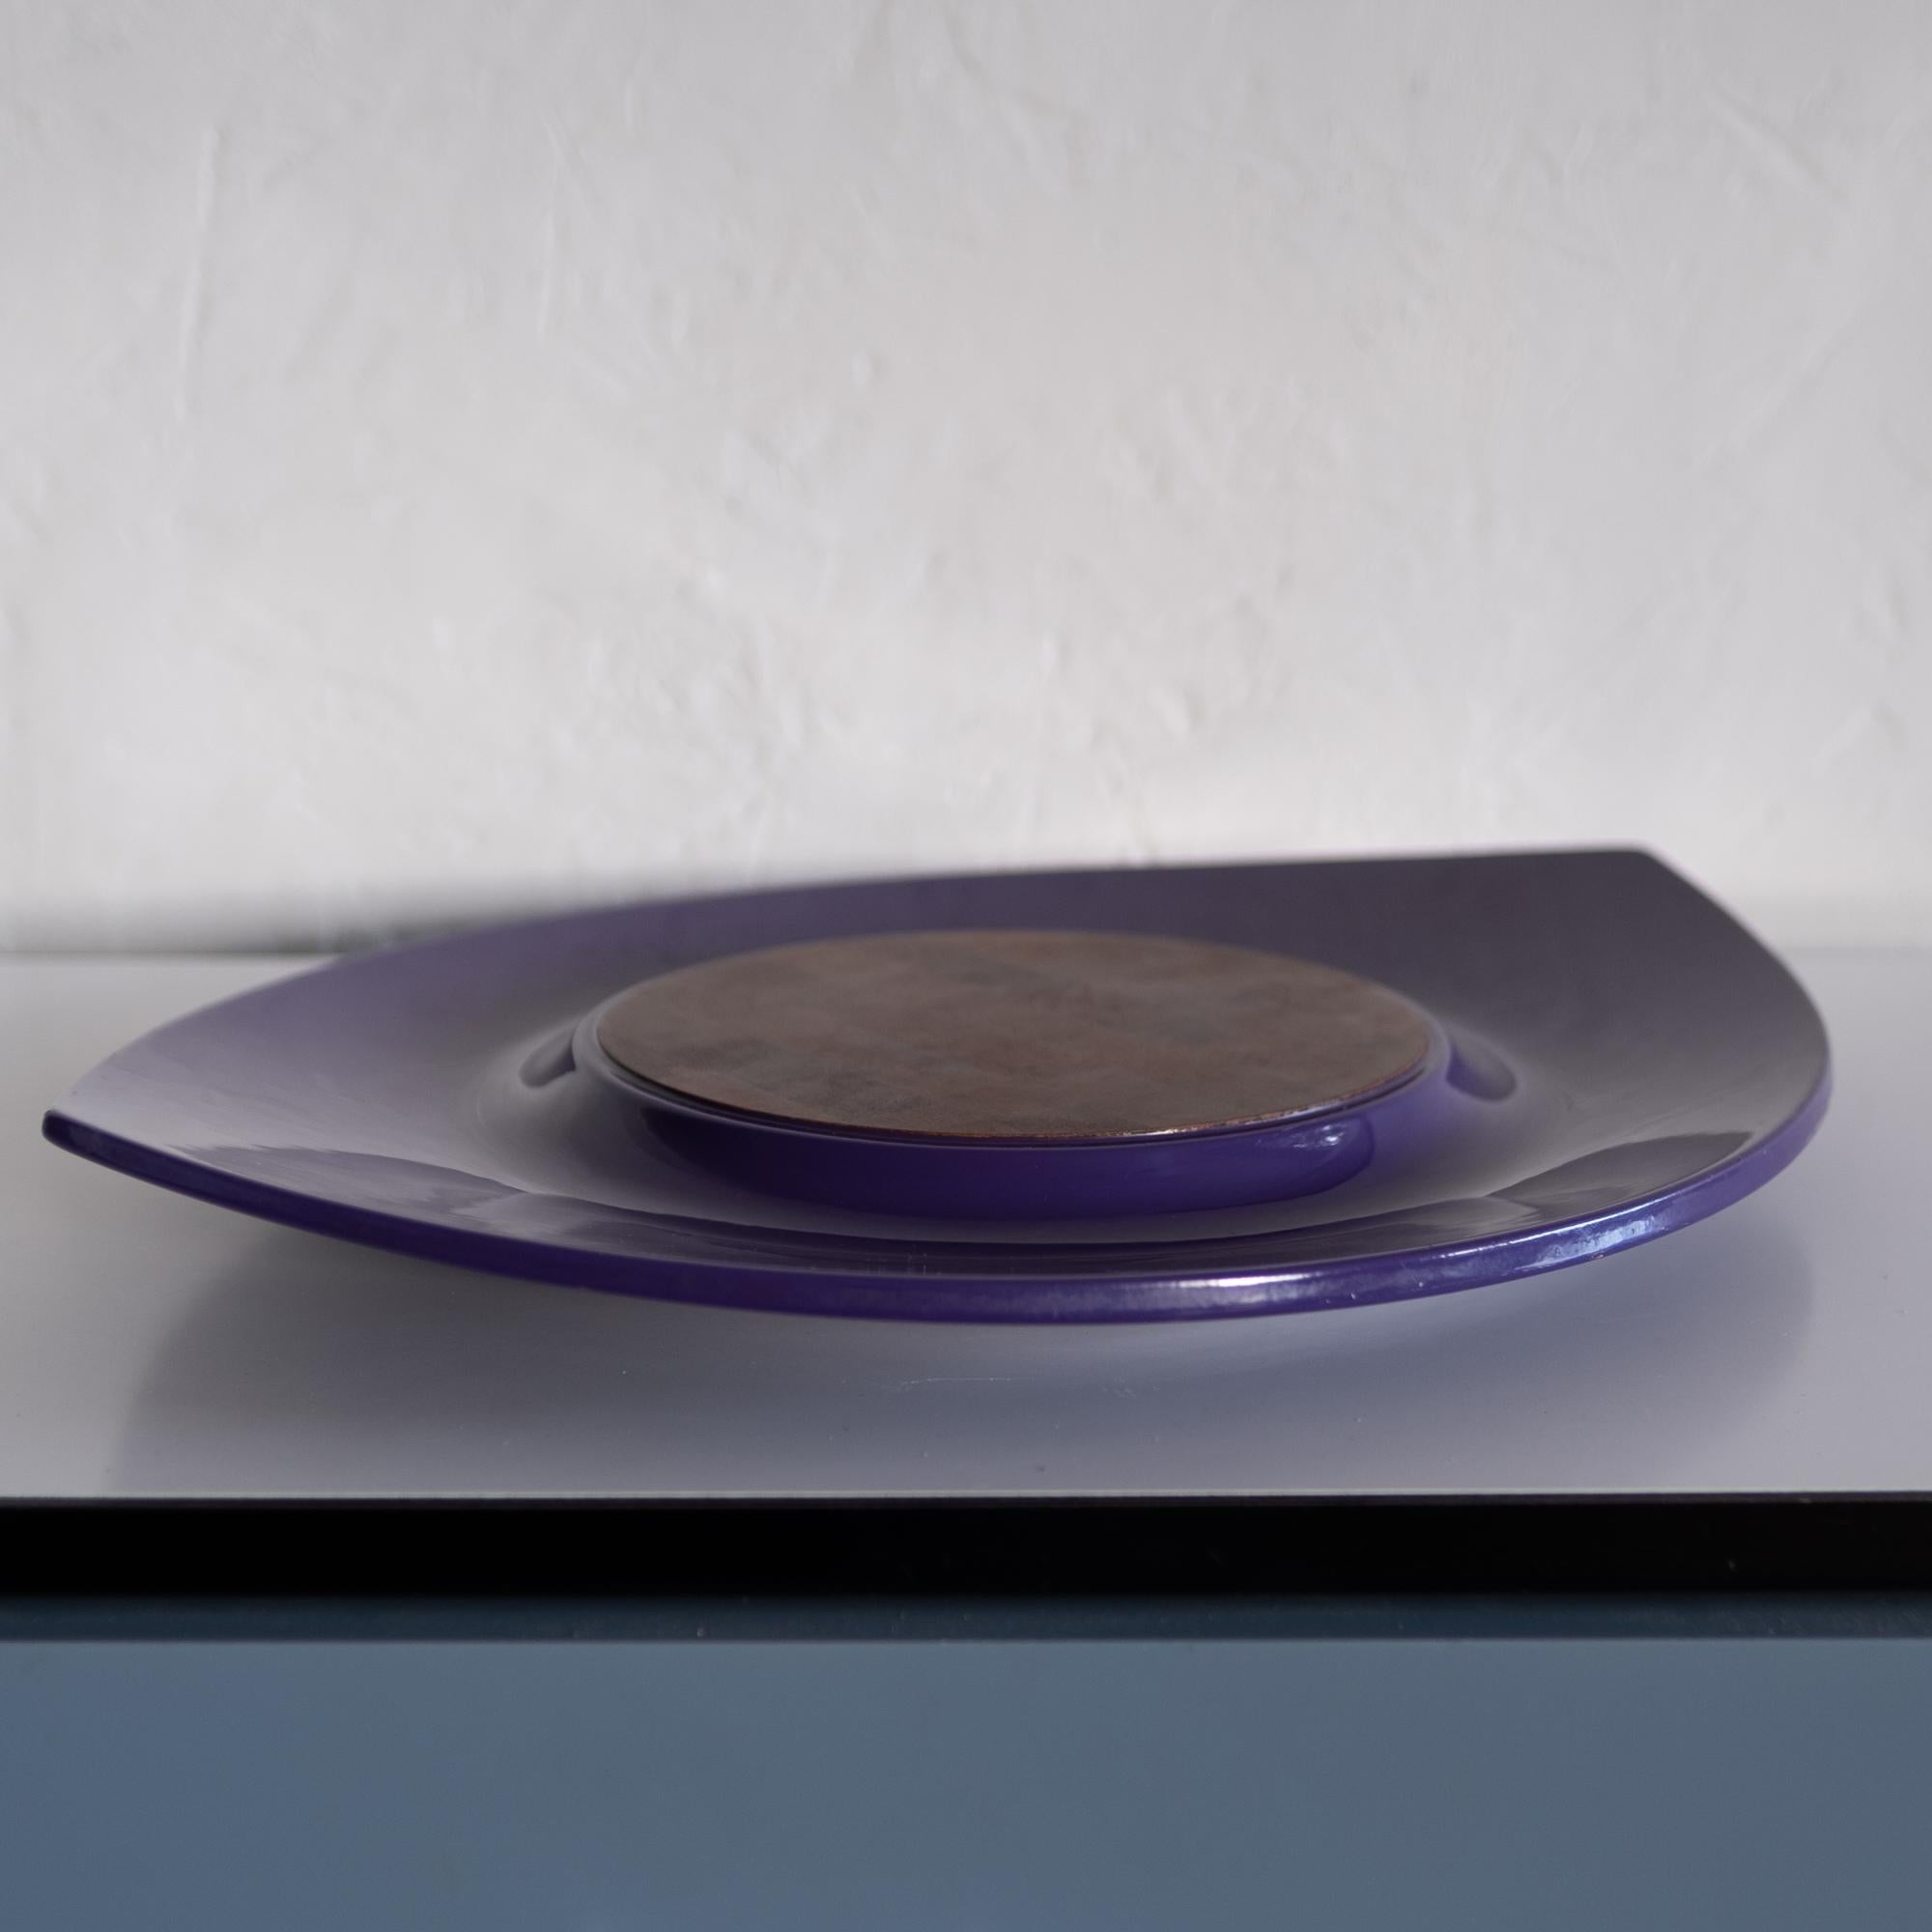 Lacquered Festivaal Tray in Purple Lacquer with Teak Insert by Jens Quistgaard for Dansk